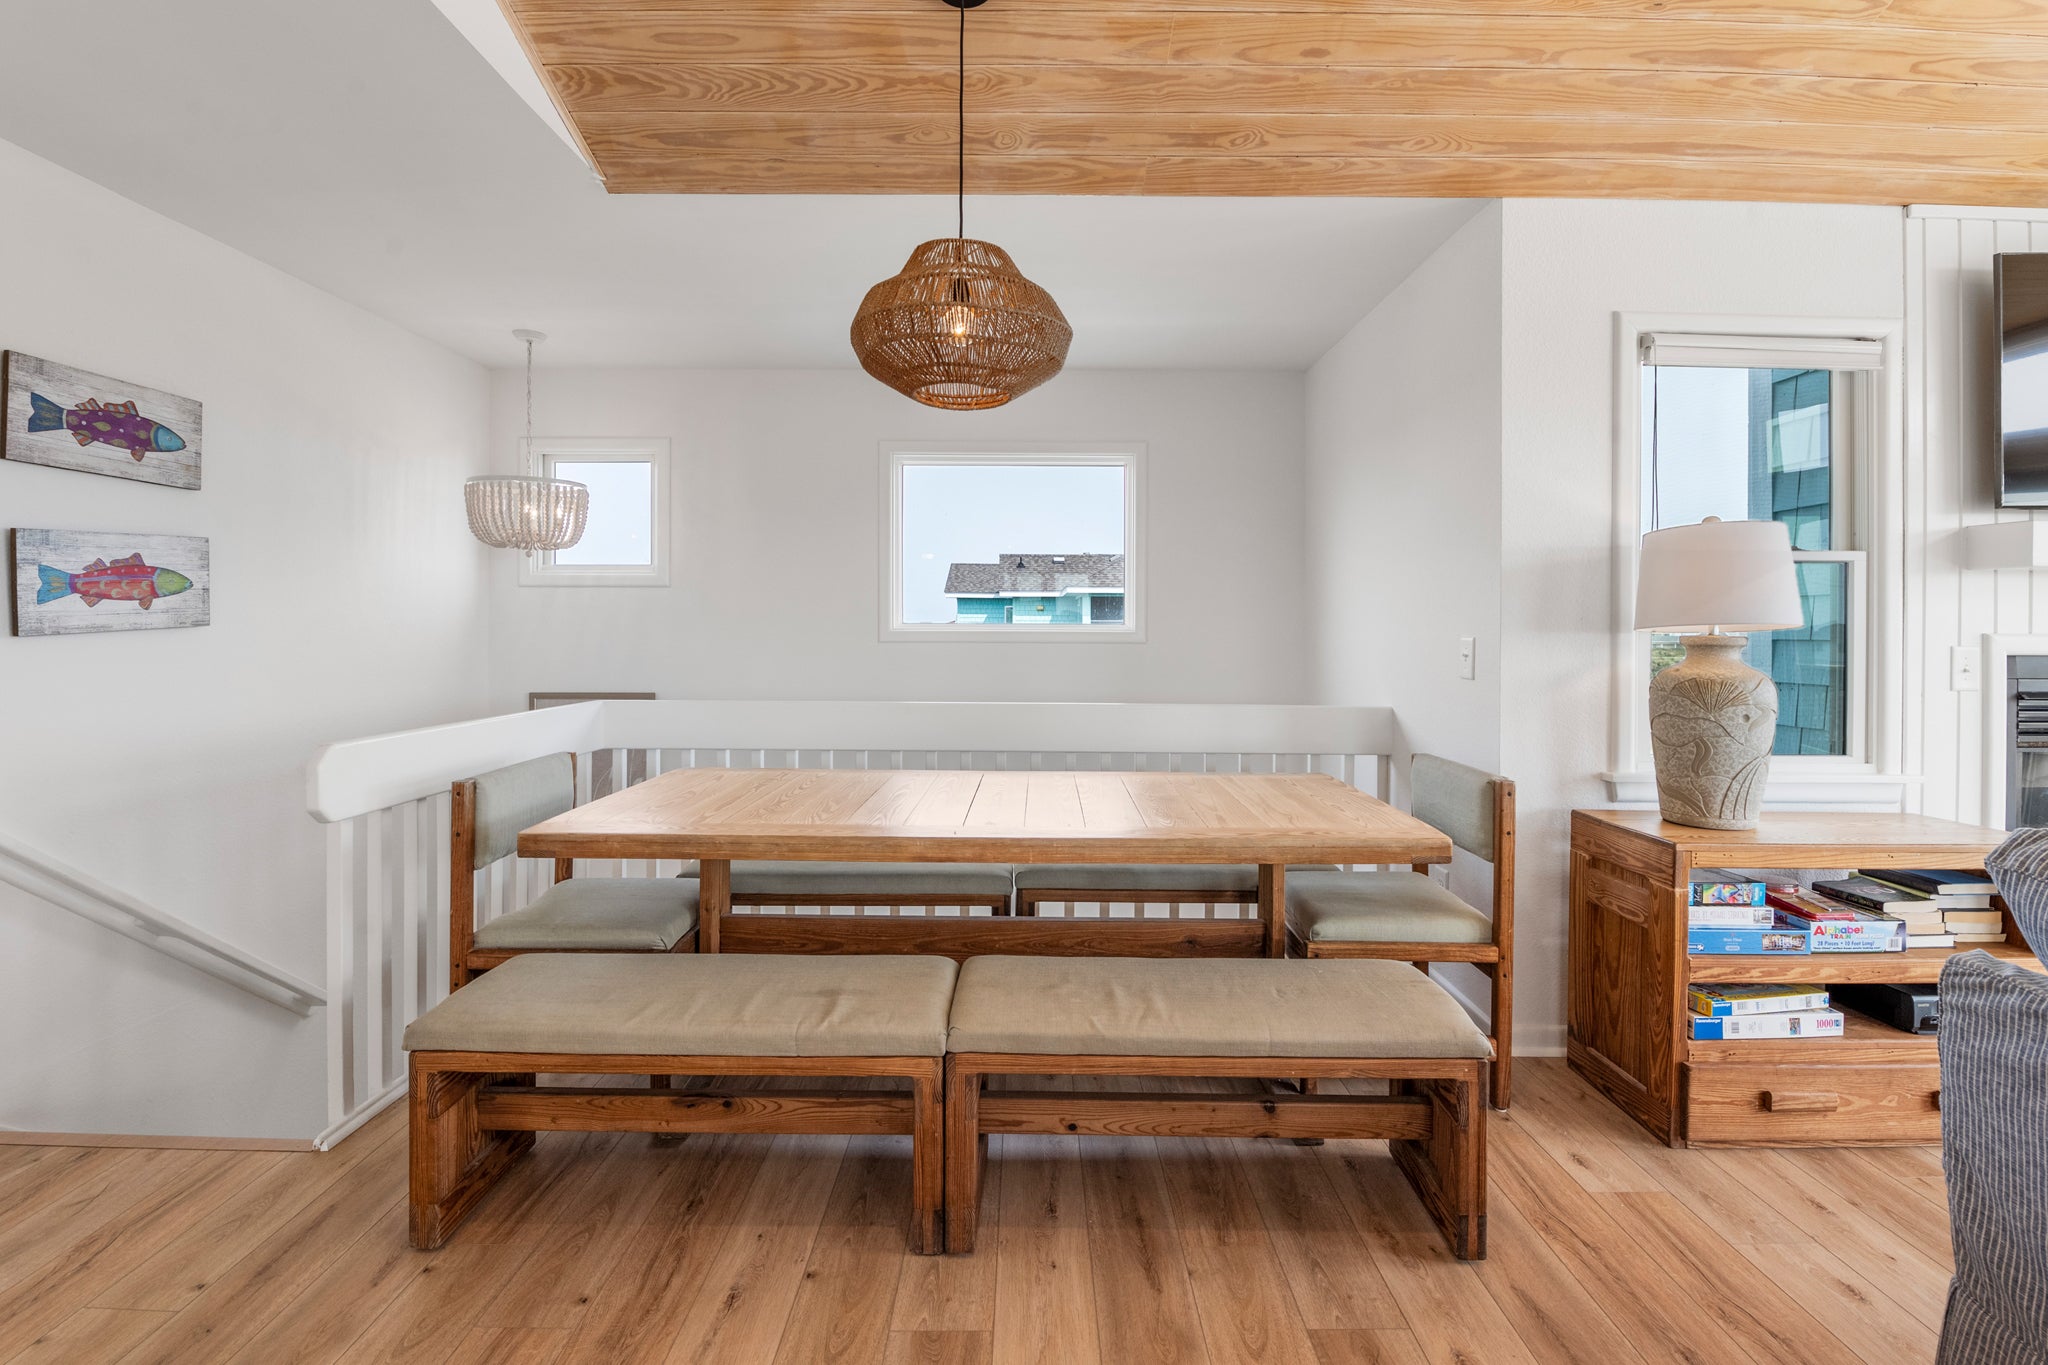 SH173: Ocean Haven | Top Level Dining Area